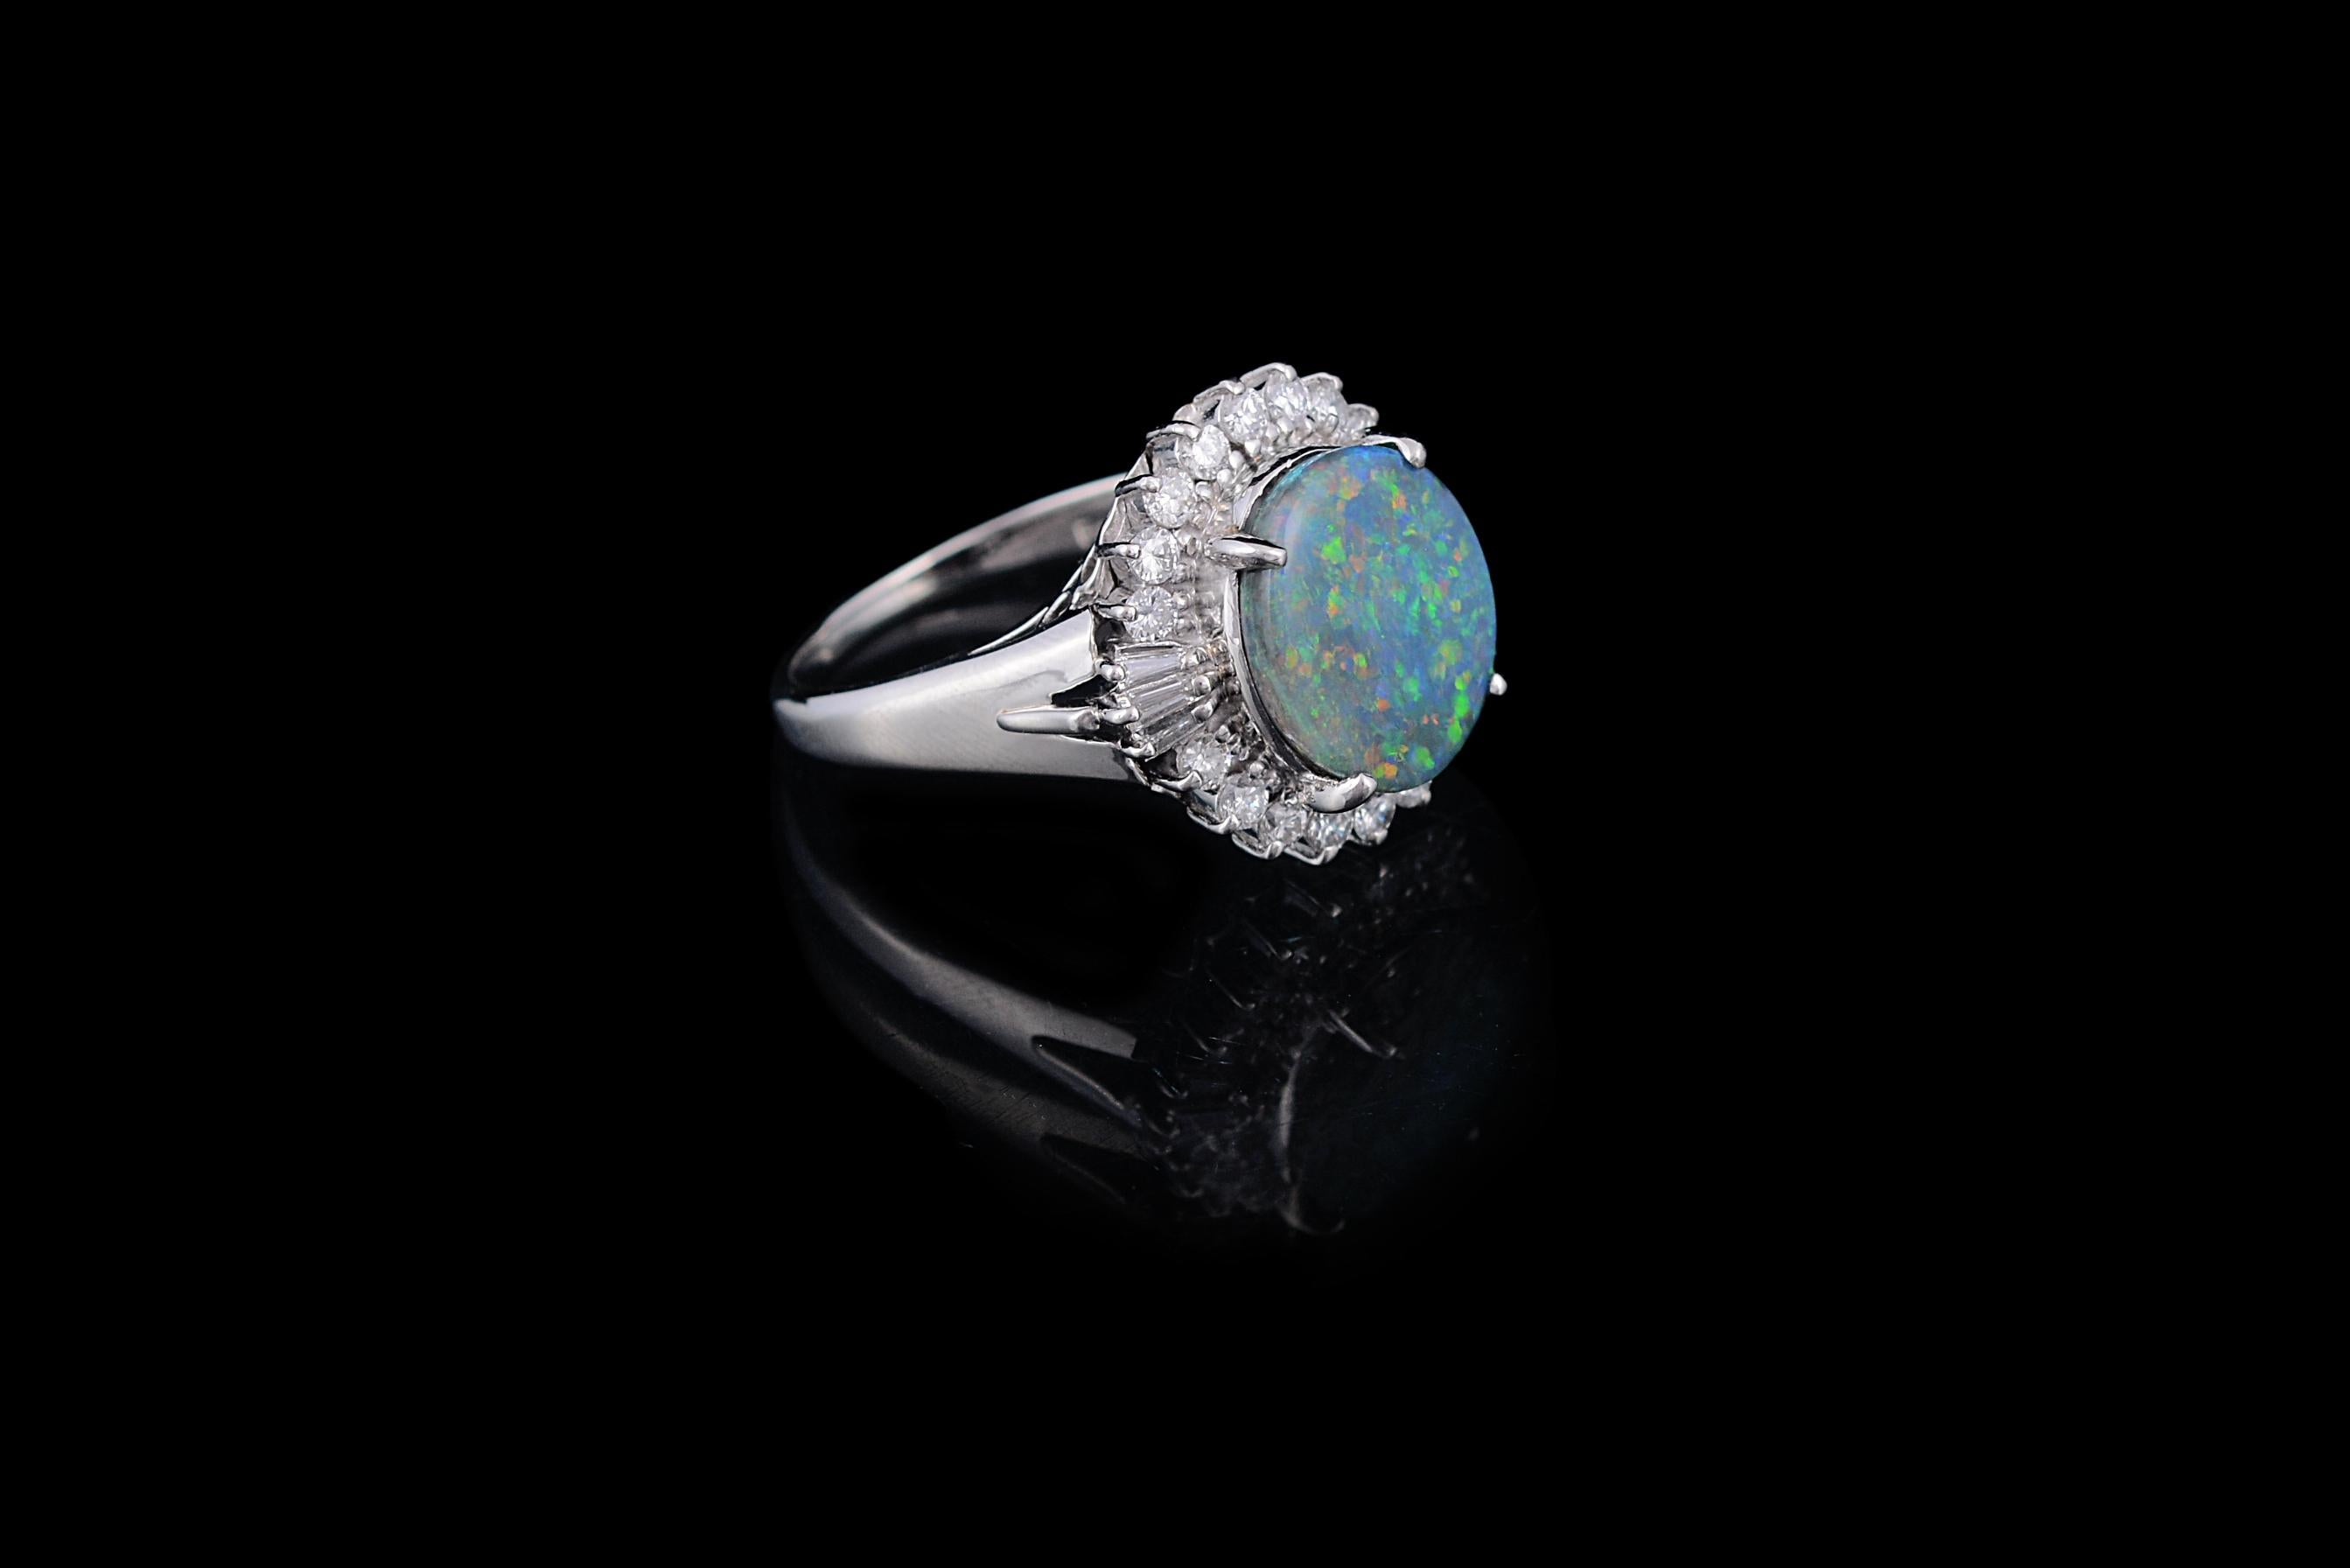 For those who want something different, a very gorgeous Australian Opal cocktail/engagement ring with diamonds. The Australian opal weighing 3.15 carats and has a gorgeous play of green and blue on its surface. The weight of the diamonds is 0.9